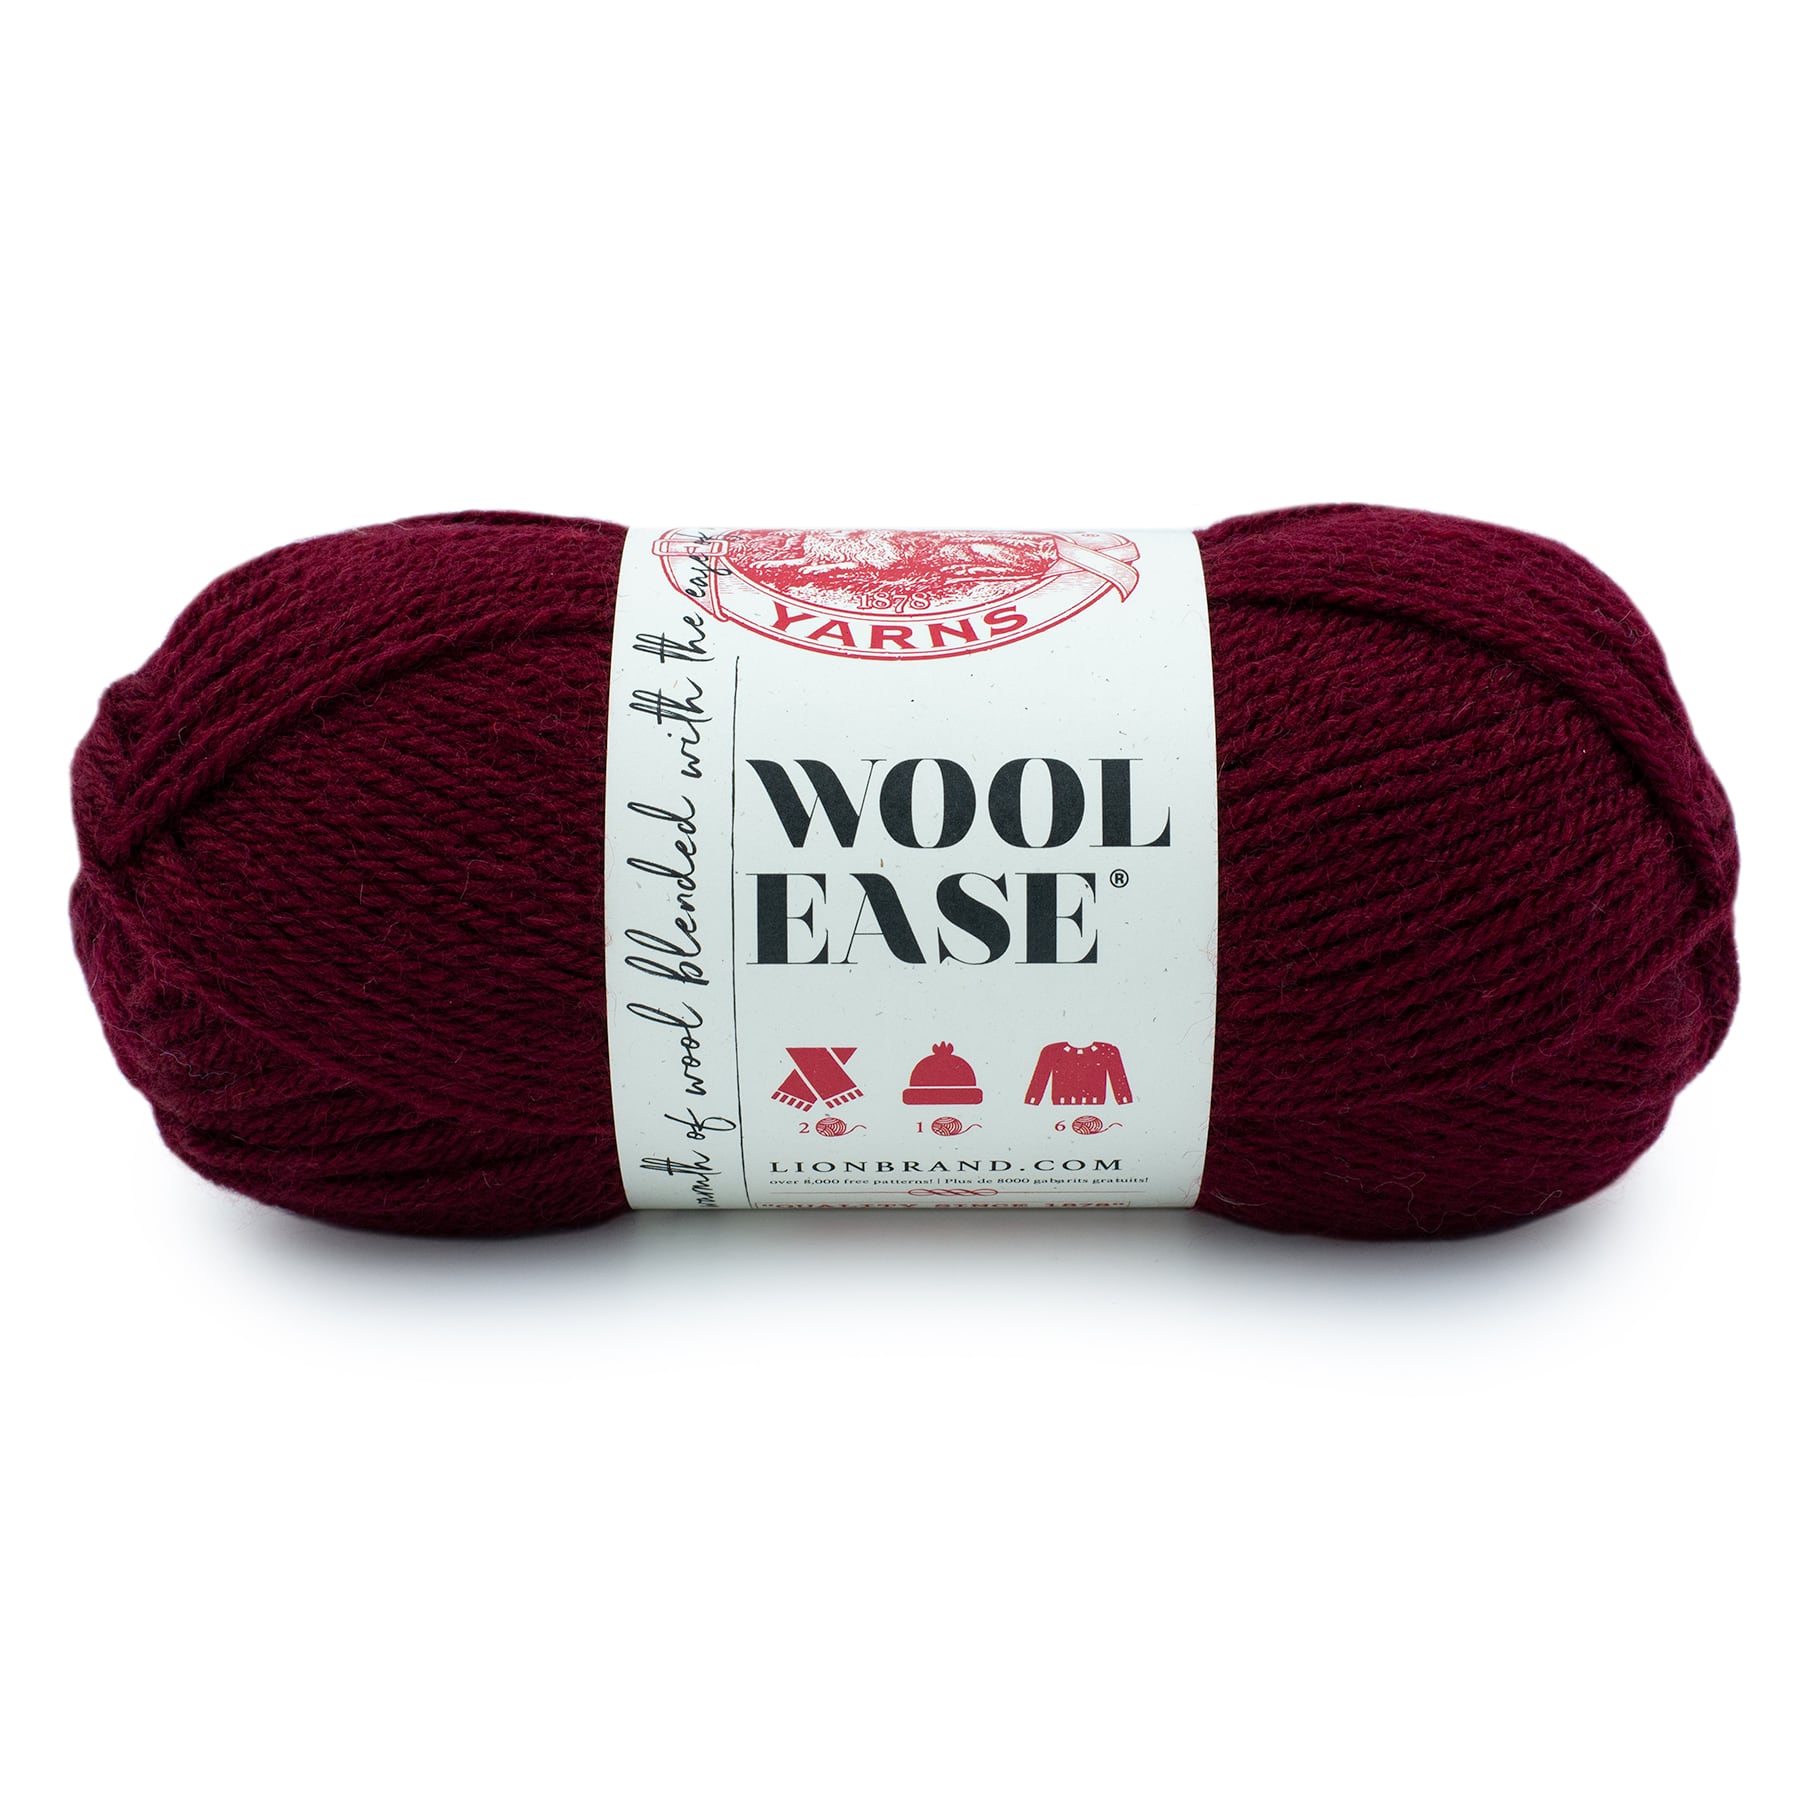 15 Pack: Lion Brand® Wool-Ease® Solid Yarn